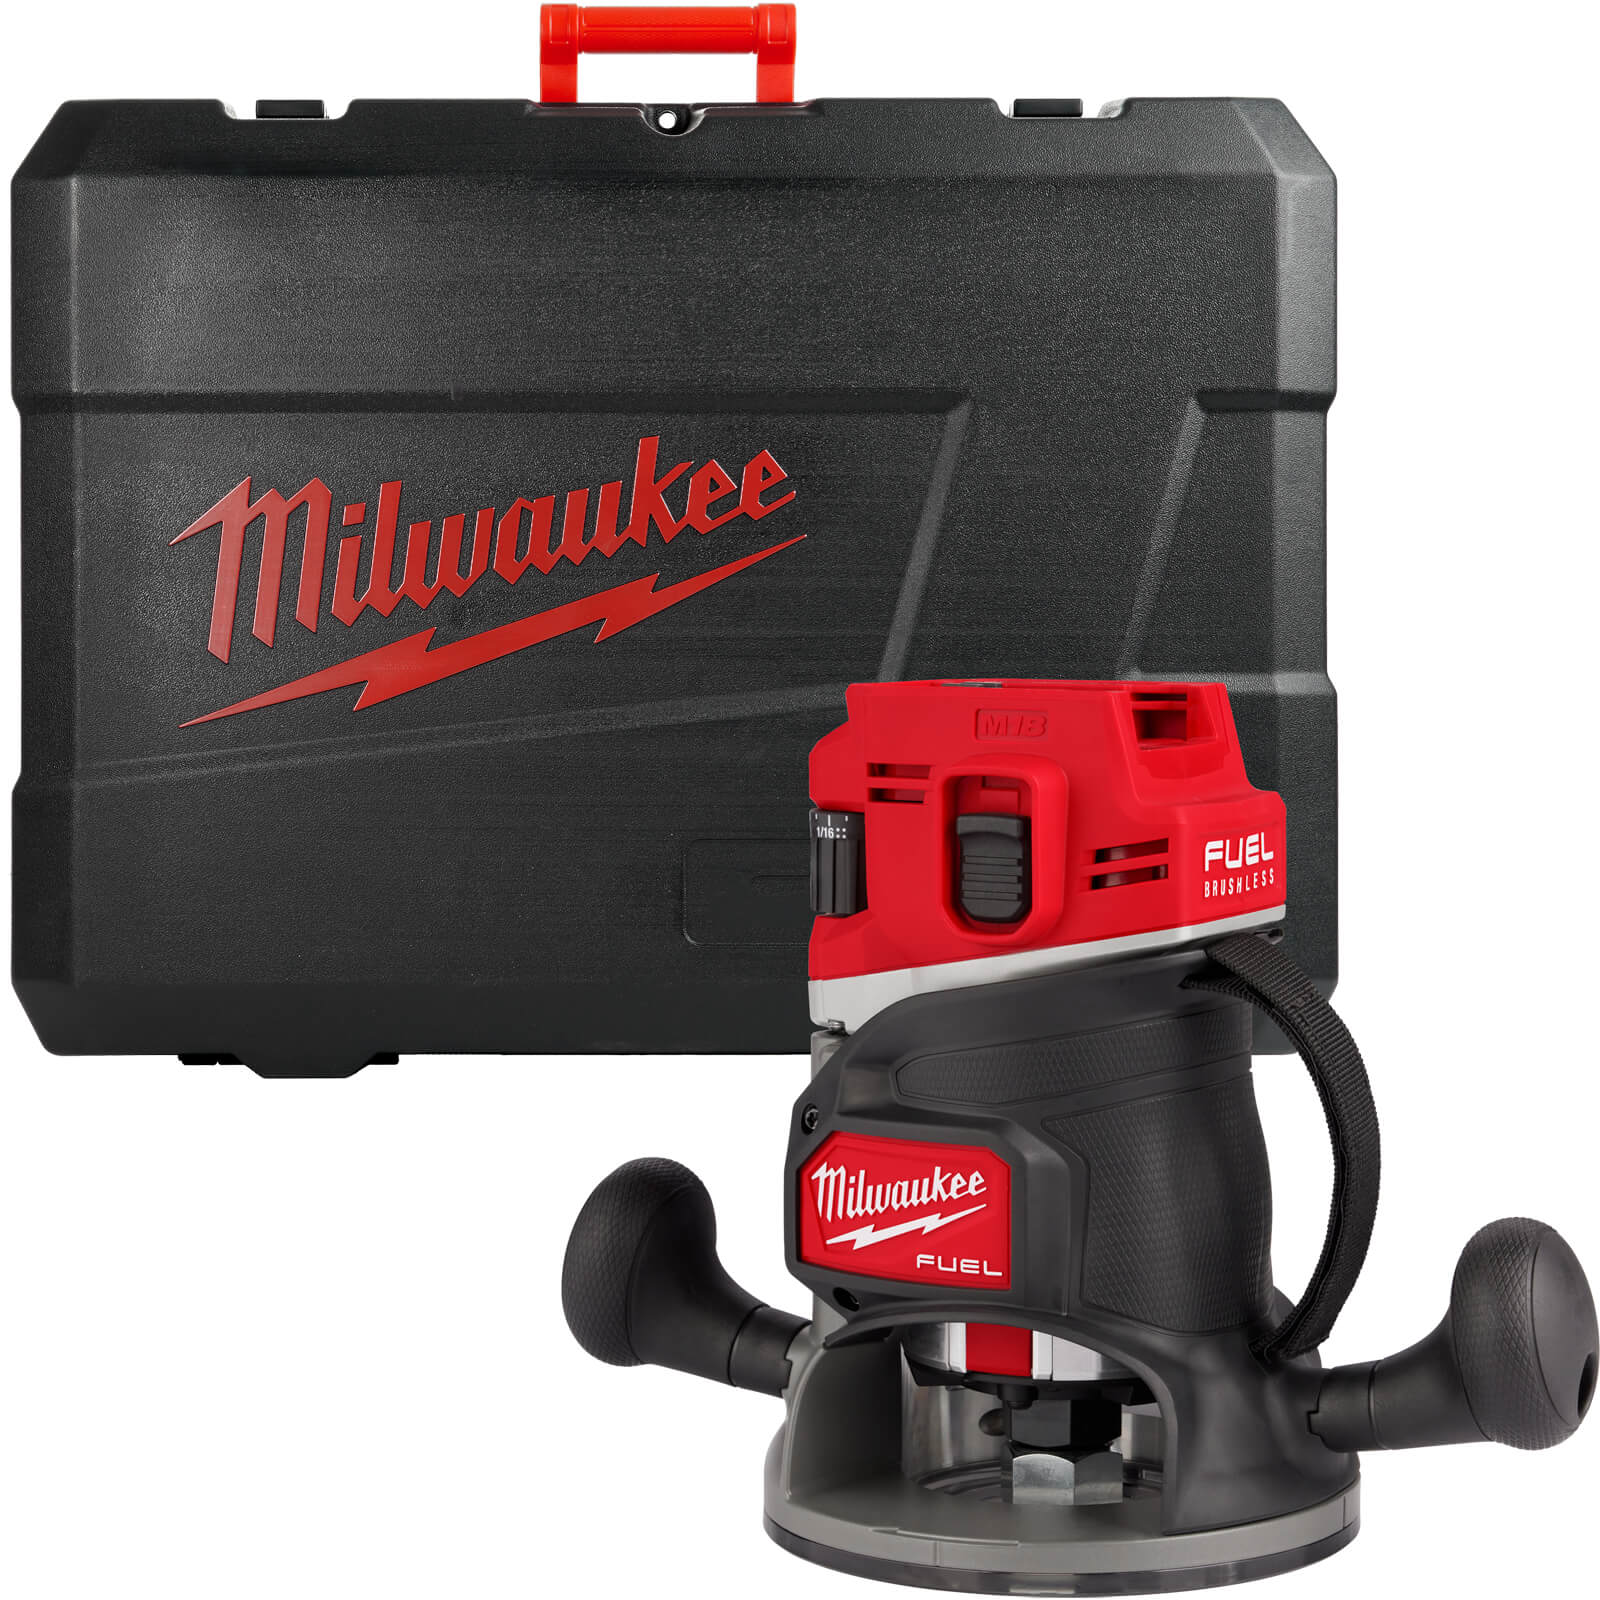 Milwaukee M18 FR12 Fuel 18v Cordless Brushless 1/2" Trim Router No Batteries No Charger Case